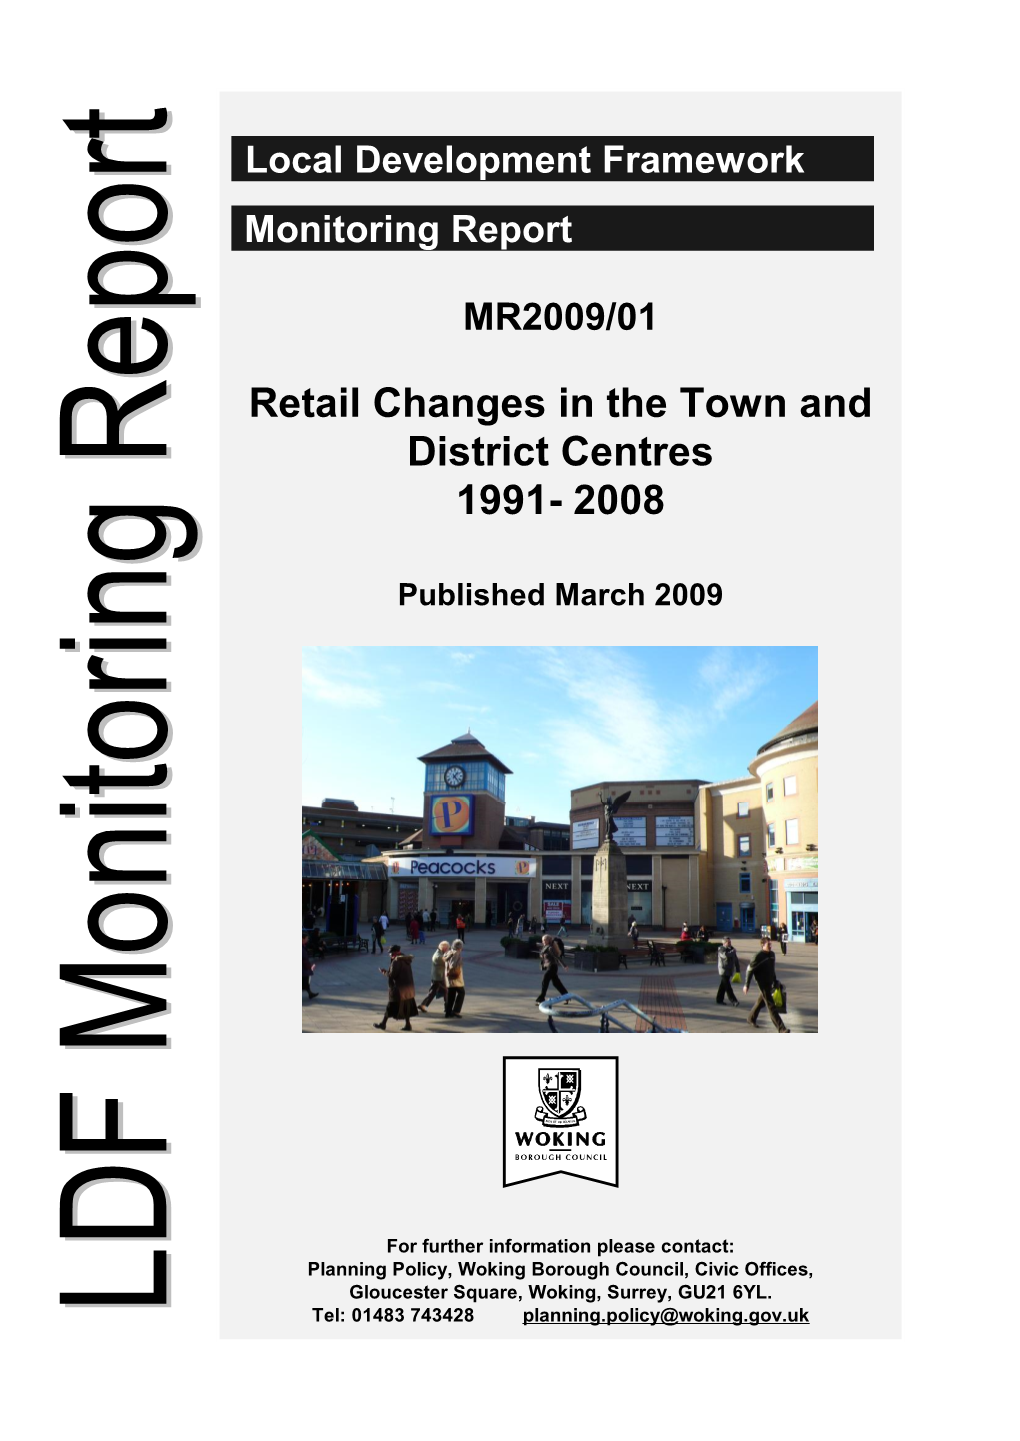 Retail Changes in the Town and District Centres 1991- 2008